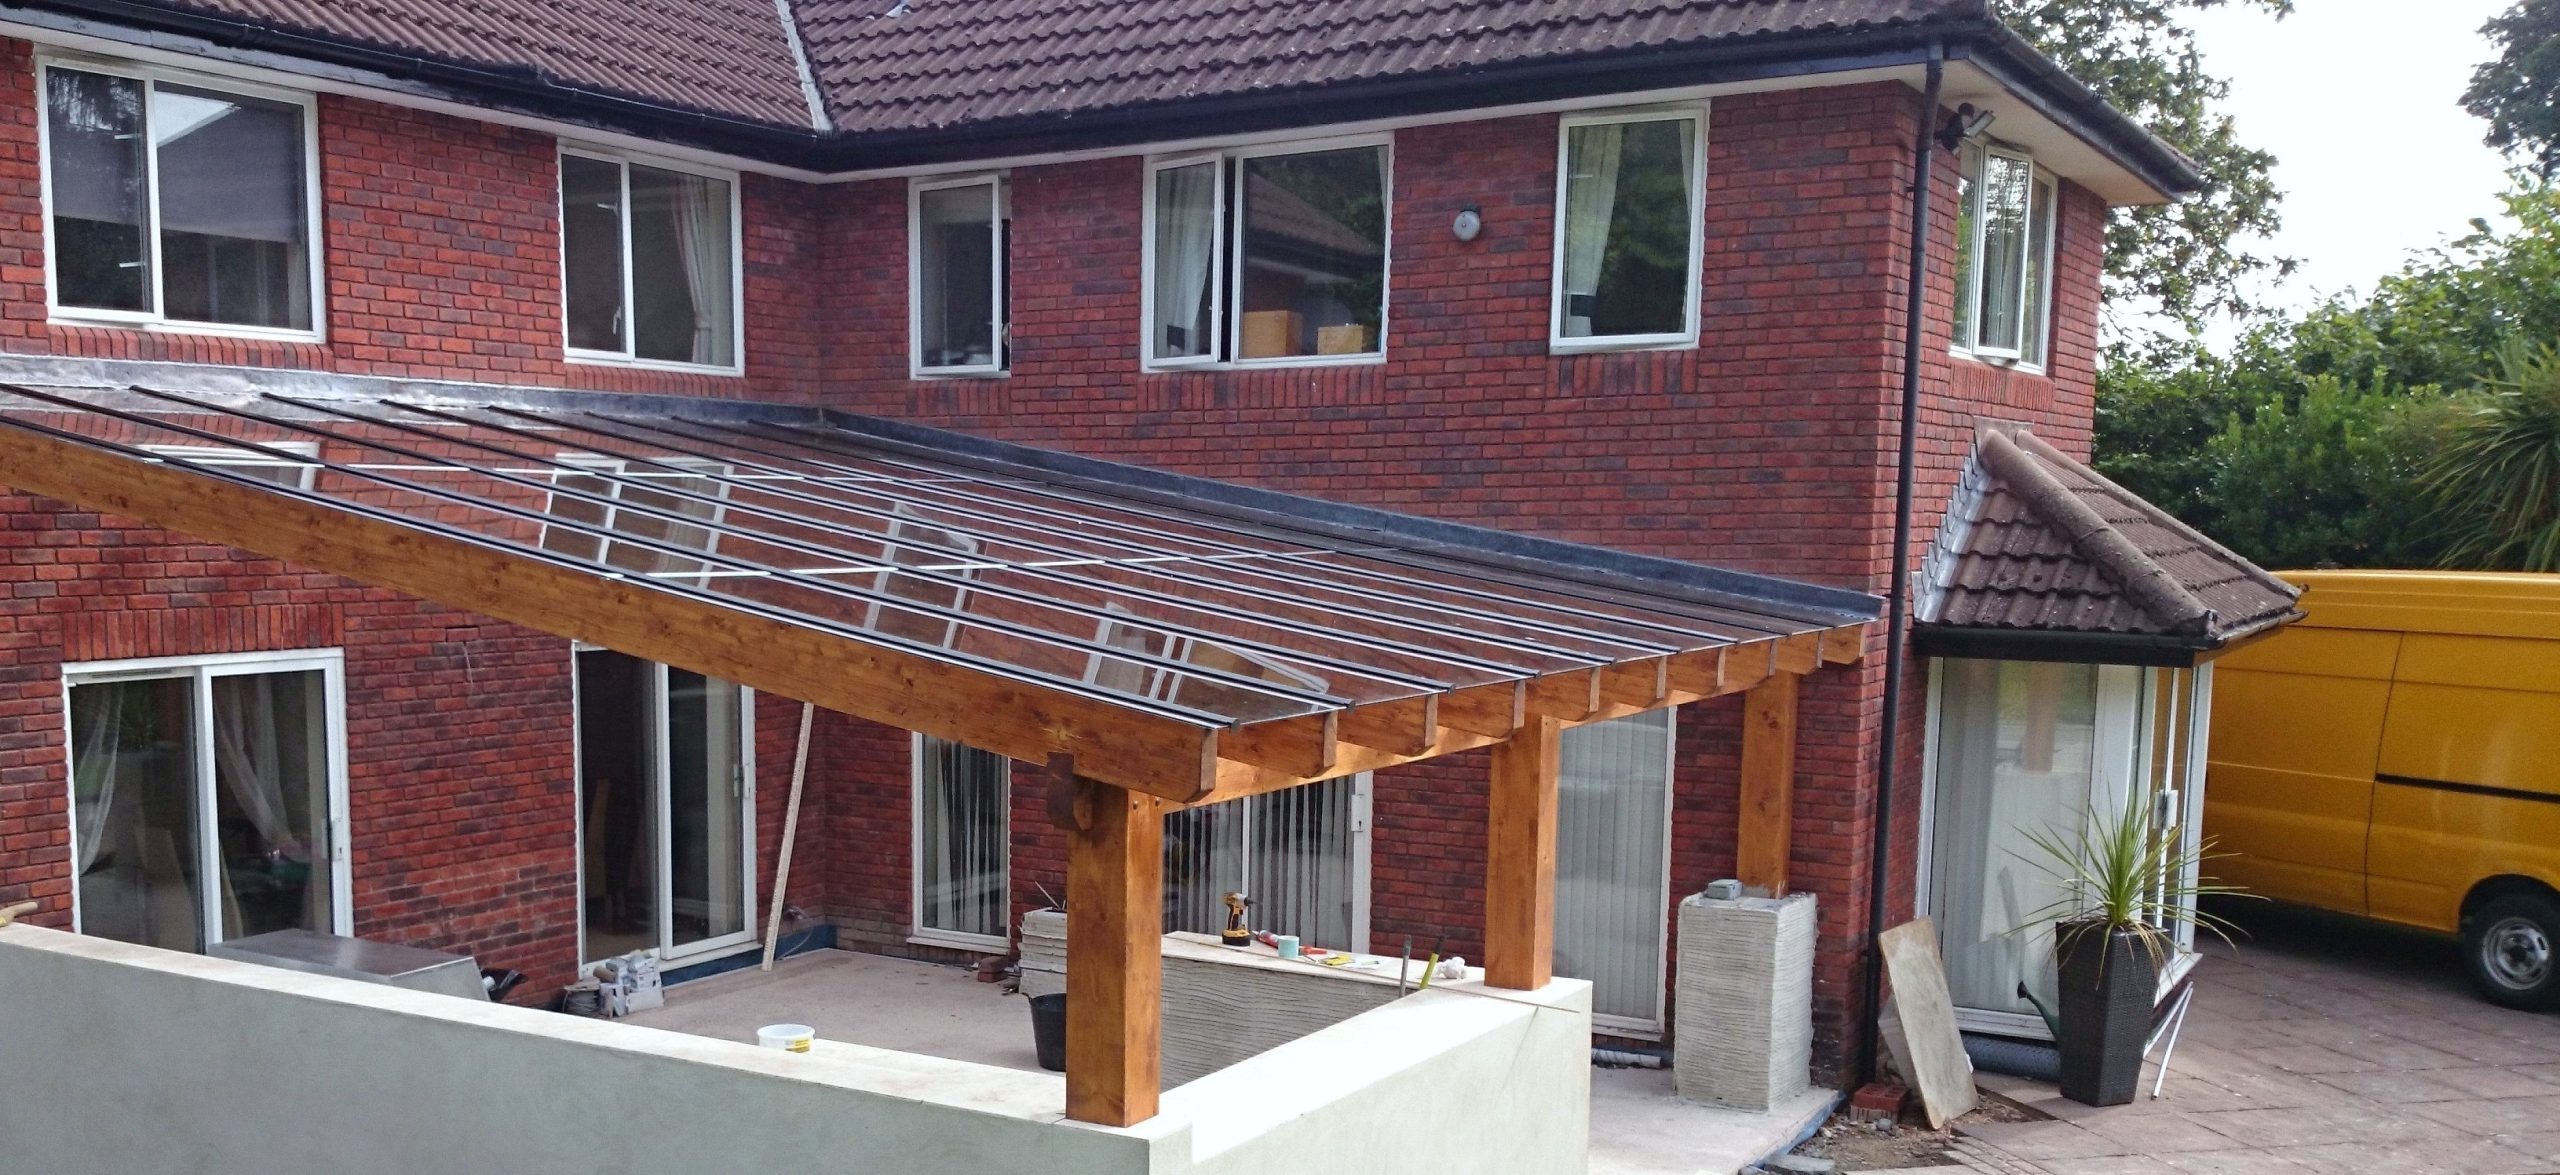 How To Frame A Lean To Roof